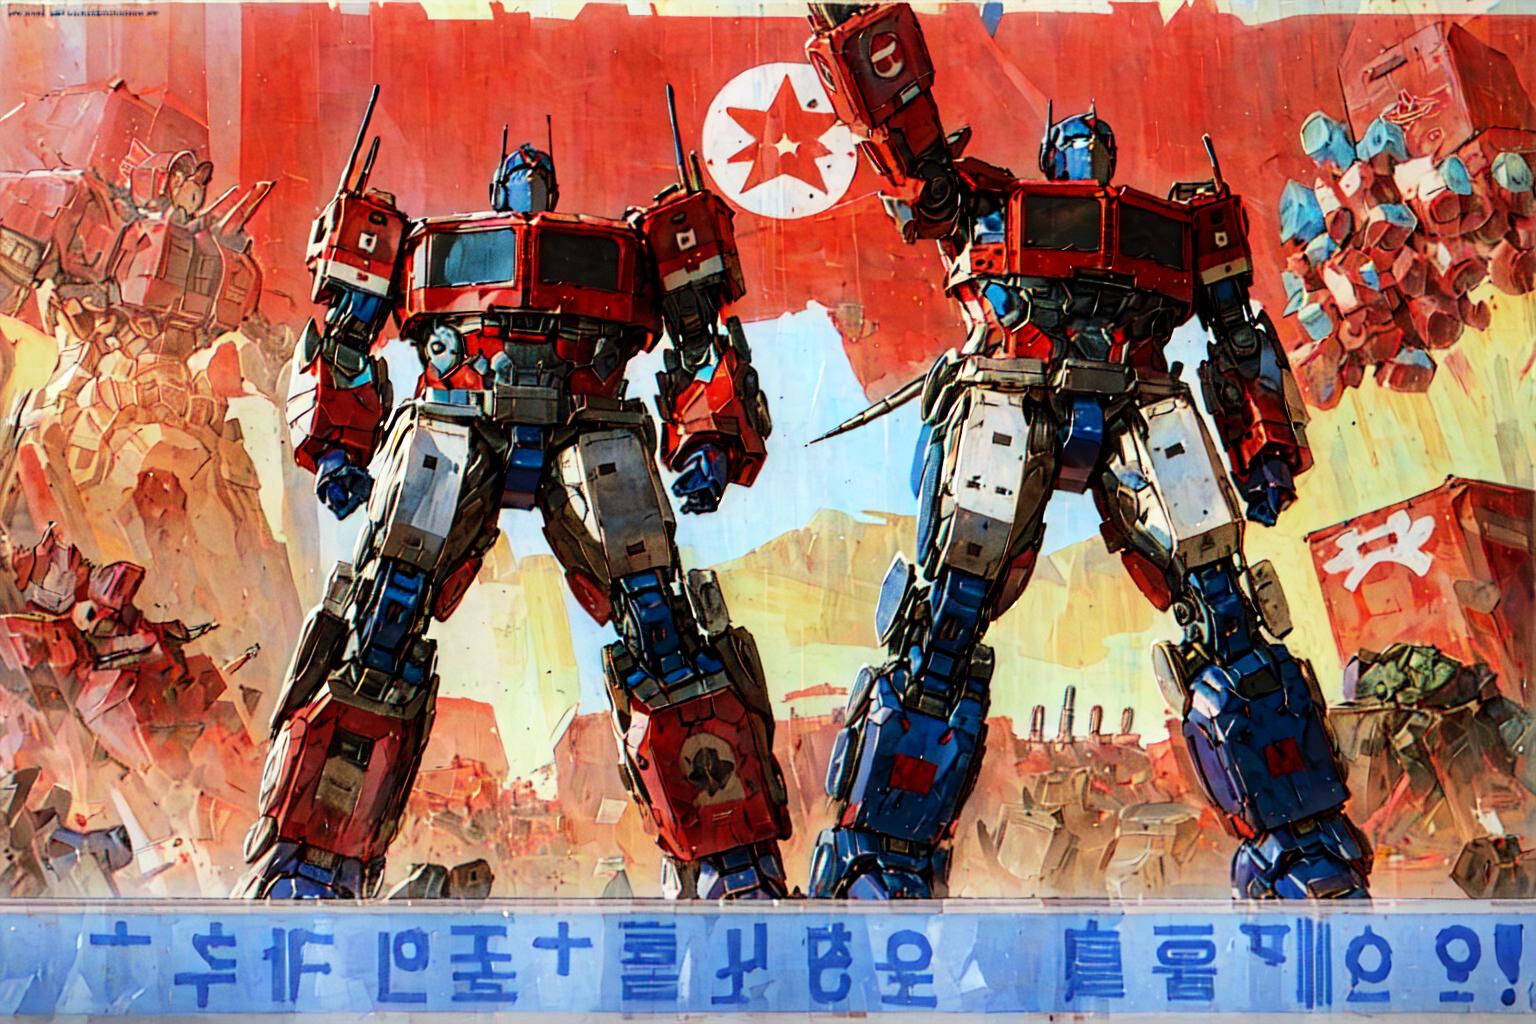 Two red, white, and blue robots standing next to each other with a red star above them.